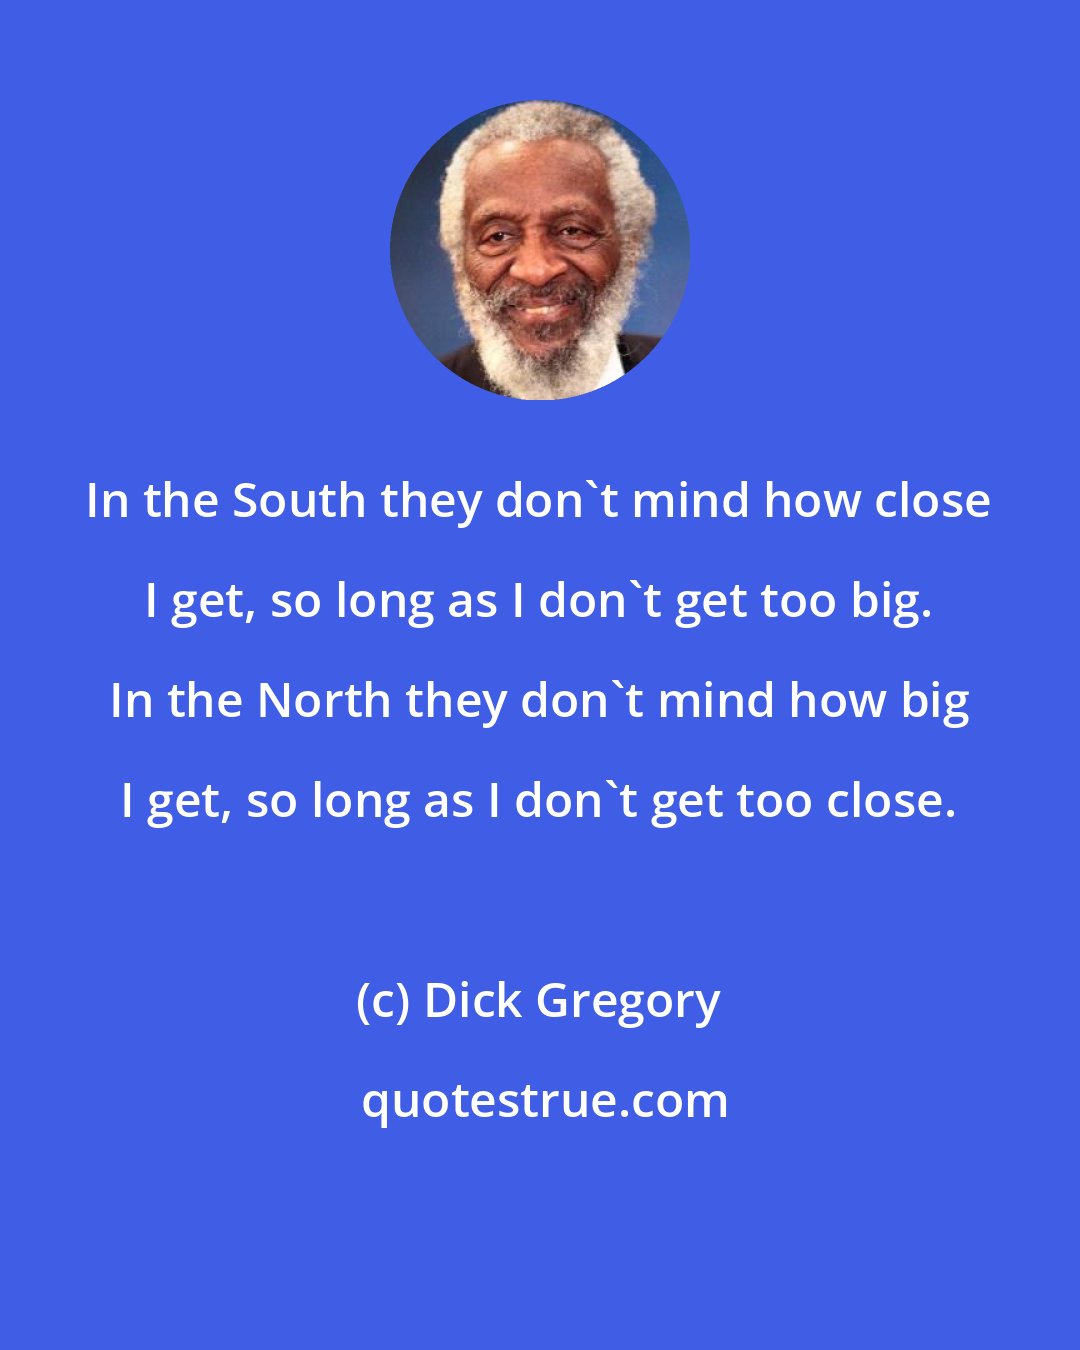 Dick Gregory: In the South they don't mind how close I get, so long as I don't get too big. In the North they don't mind how big I get, so long as I don't get too close.